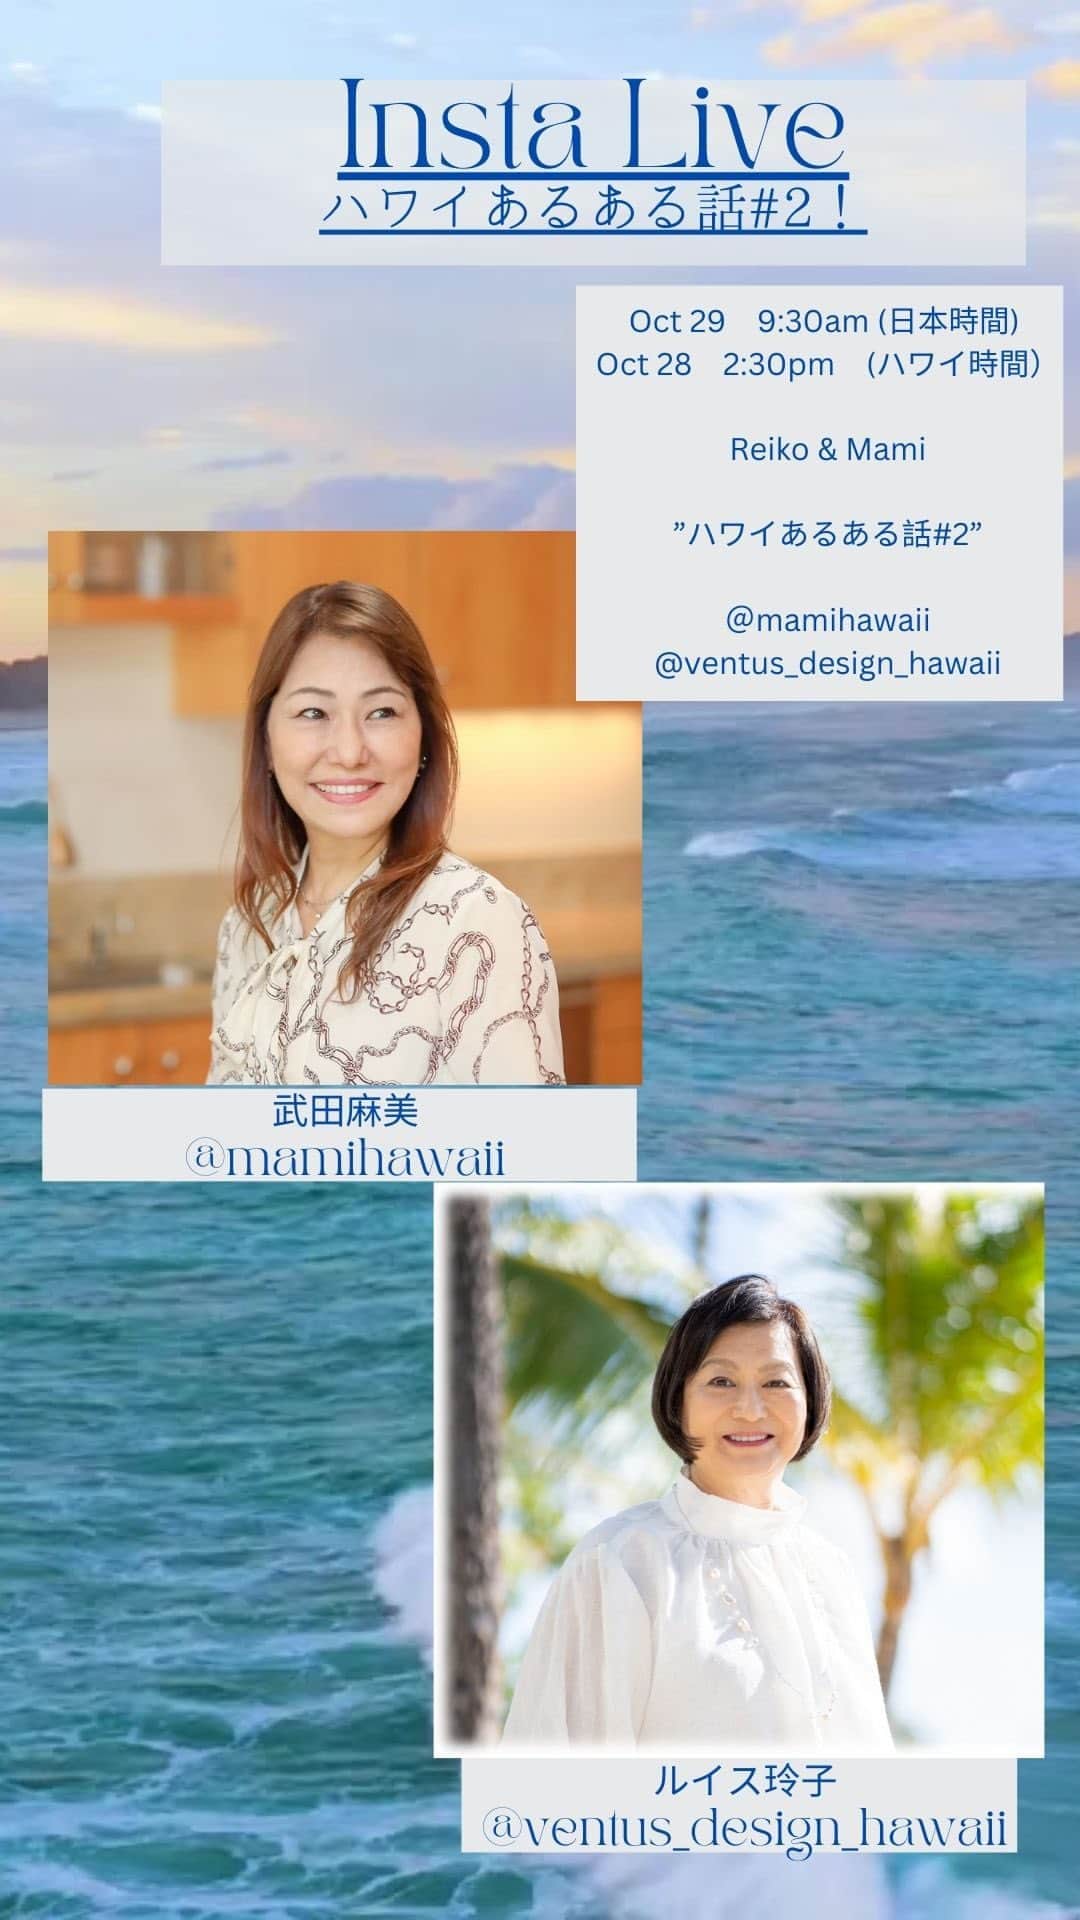 Reiko Lewisのインスタグラム：「@lifeinovation_2015 STRONGWOMAN より Mamix Reikoのコラボライブ  Hawaiiアルアル事情2回目。 アロハスピリットの深い意味、ゆっくり時の流れるハワイについてお話しさせて頂きました。 是非アーカイブのご視聴お願いします。 ライブご視聴くださった皆様有り難うございました！  STRONGWOMAN by @lifeinovation_2015 Mami x Reiko collaboration live  This is the second live performance of Mami and Reiko. The title is Hawaii’s common scenes and practices. We talked about the deep meaning of Aloha, as it is more than just “Hello”! Please watch the archive. Thank you very much to everyone who watched the live!  @mamihawaii @ventus_design_hawaii  今月のSTRONG WOMANコラボライブはこちら💁‍♀️📣 Our October STRONG WOMAN collaboration lives are listed here: 💁‍♀️📣  🇯🇵Japan 🌺HAWAII  🇯🇵10/31(火)14:00-14:30 🌺10/30(月)21:00-21:30 ルイス玲子✖︎八軒あやね✖︎○○ 「ハロウィン🎃スペシャルライブ」　 Reiko Lewis✖︎Ayane Hachiken✖︎xx Halloween🎃Special Live." @ventus_design_hawaii  @ayagram_8_   #STRONGWOMAN #LIFEINNOVATION #ルイス玲子 #武田麻美 #女性起業家 #コラボライブ #ハワイ #美しく生きる #マイルール #luckyweliveinhawaii  #women entrepreneurs #Collaboration Live #Live-beautifully #MyRules」